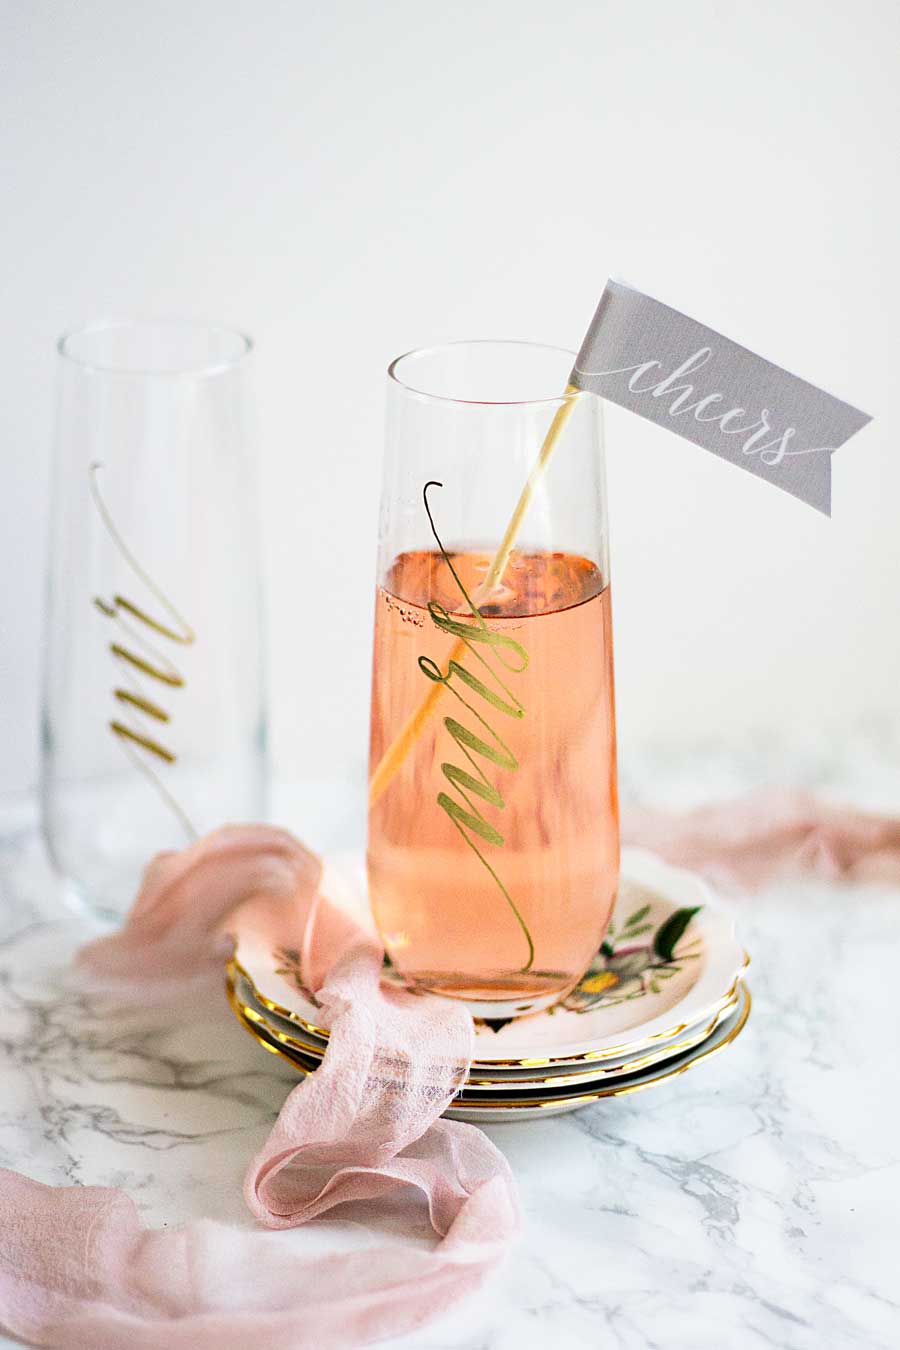 Make these fun and festive wedding champagne flutes for your own wedding or to give as gifts to all your friends. All you need are glasses and paint pen! Wedding champagne glasses. DIY wedding champagne flutes. Mr and Mrs champagne glasses.